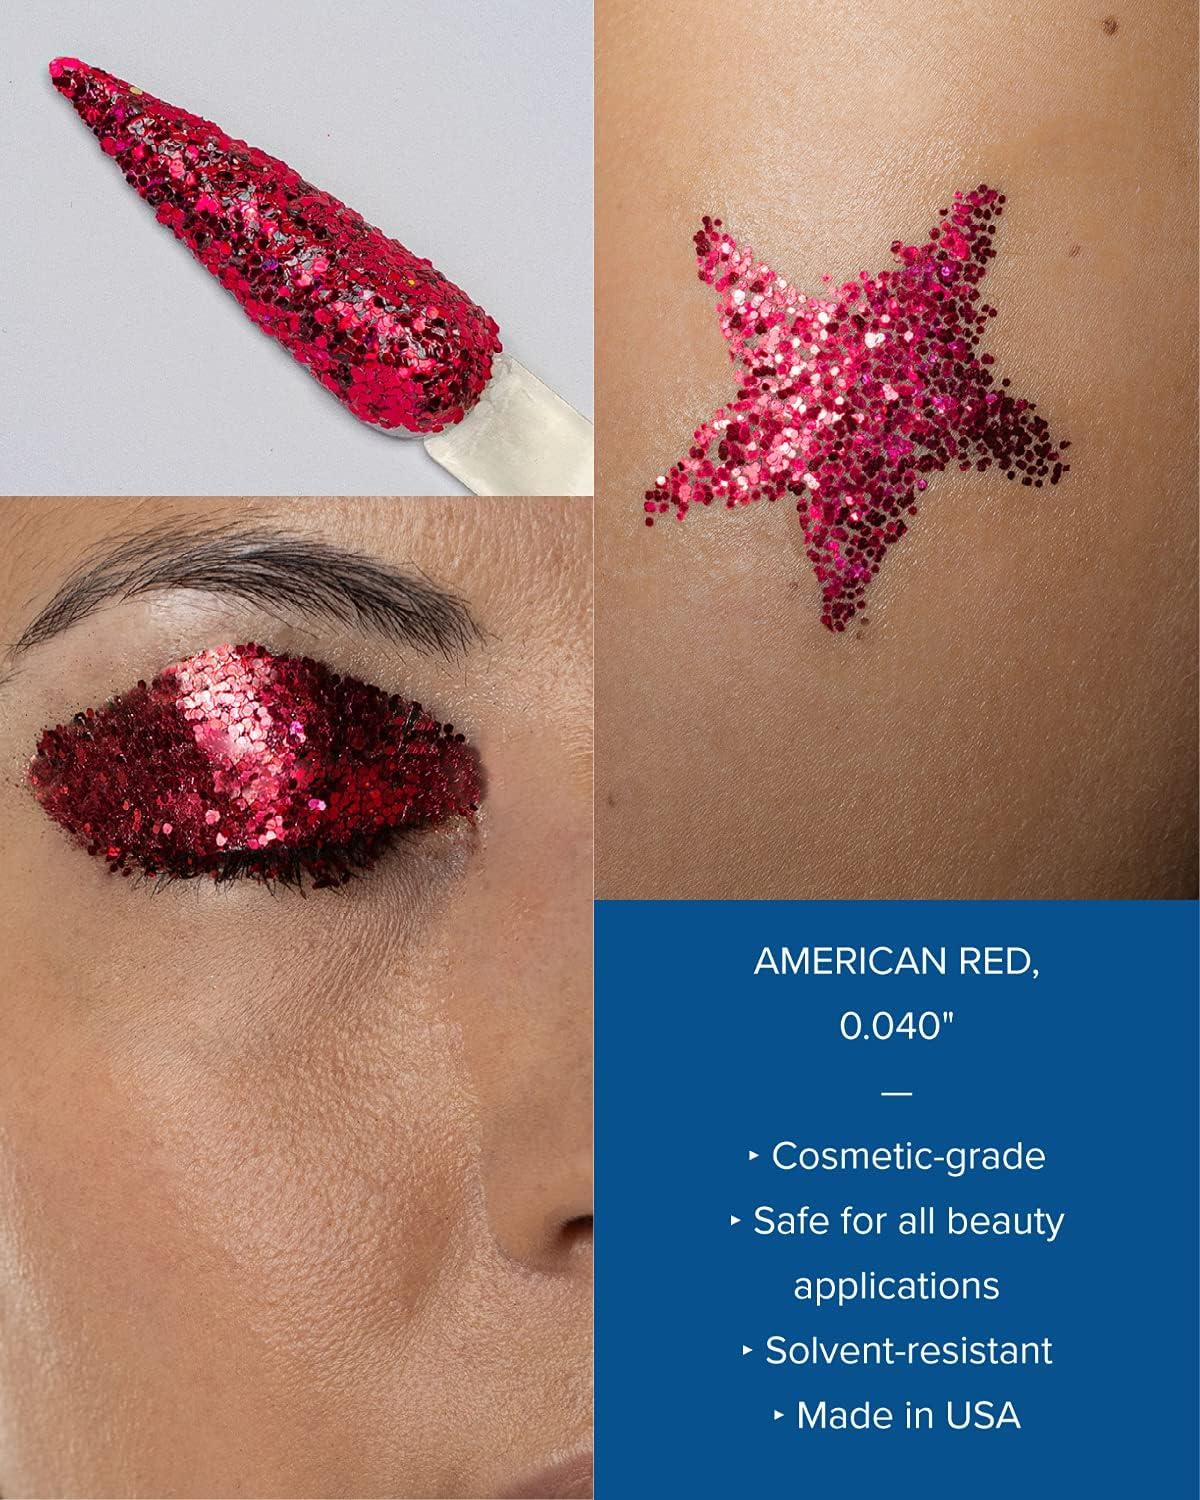 American Glitter Company Cosmetic Grade Glitter - Nail Art Face Body Makeup  - Made in USA - Red net 10 Grams (0.35 oz)